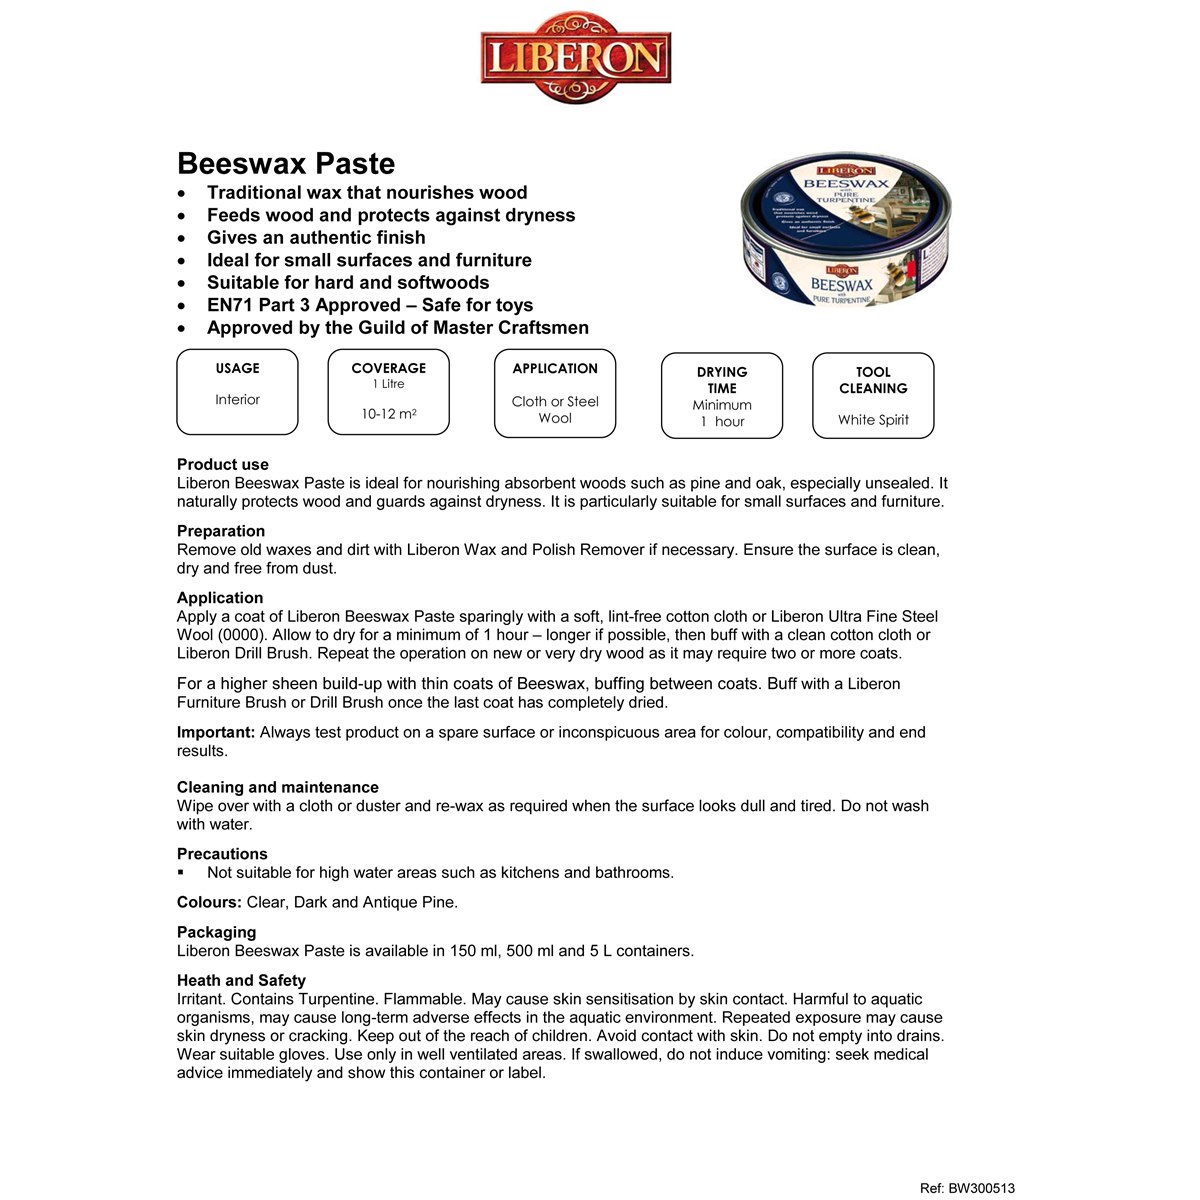 Liberon Beeswax Paste with Pure Turpentine Dark Usage Instructions